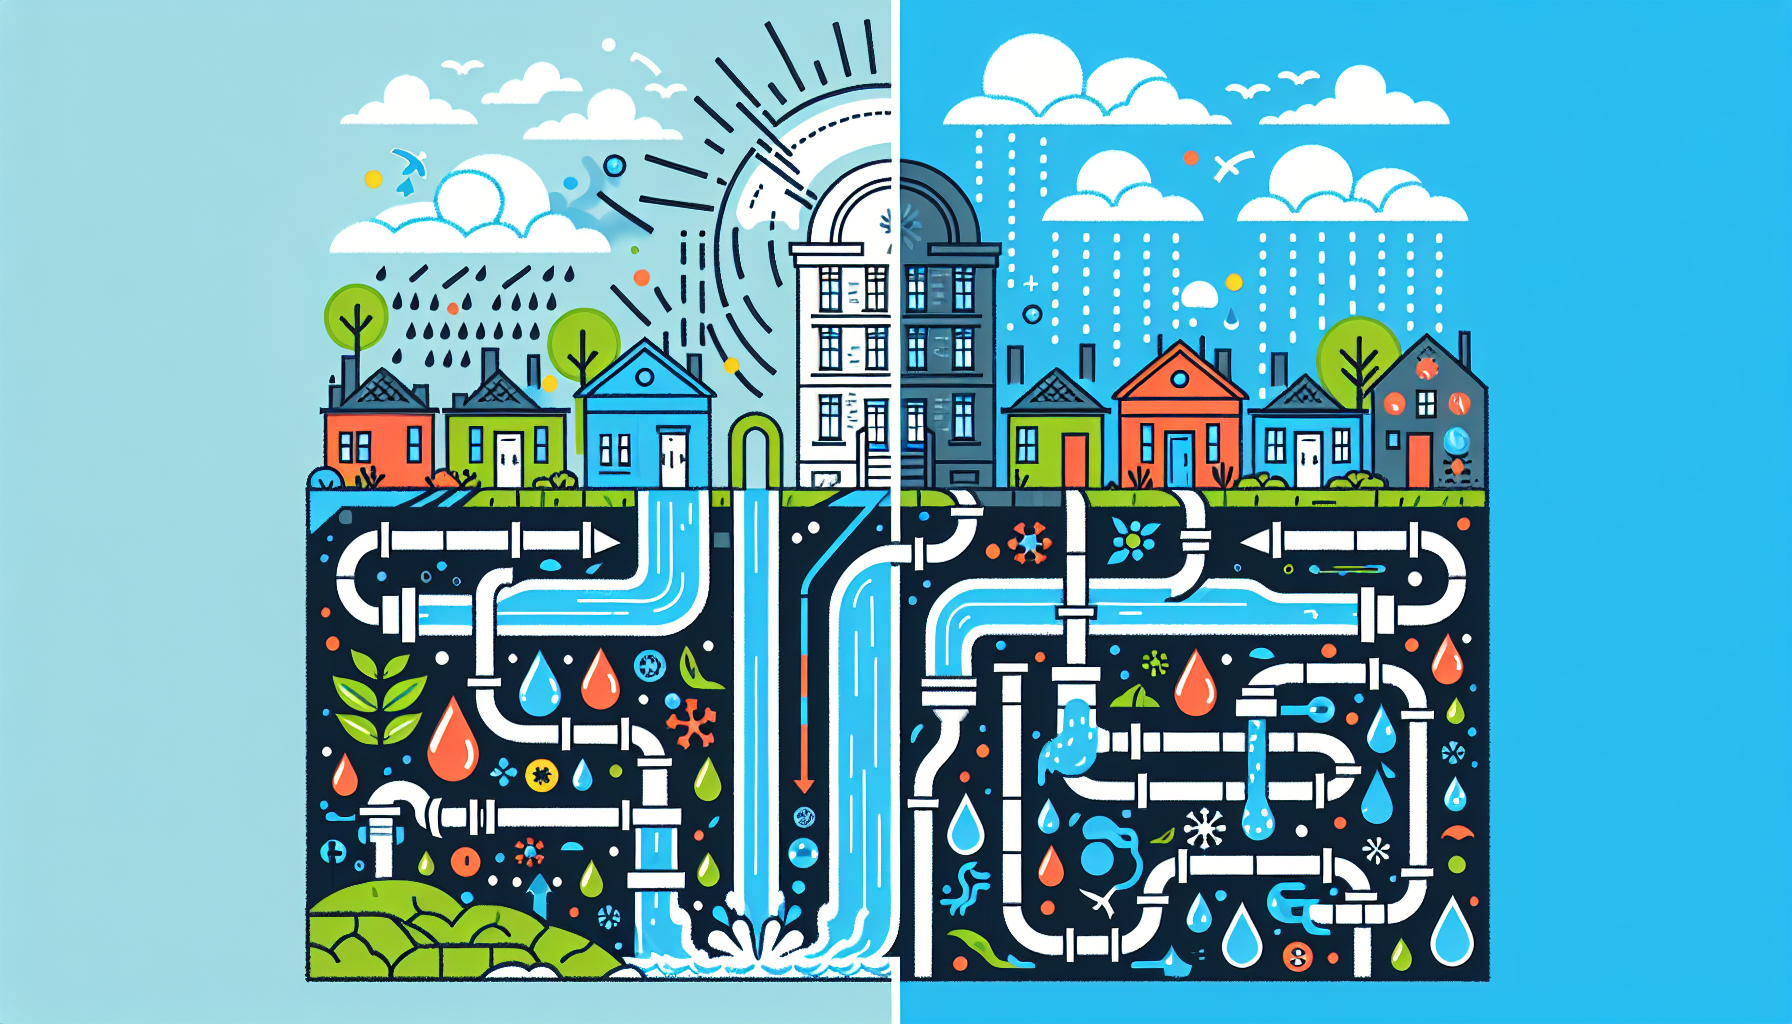 Illustration of stormwater and sewer systems